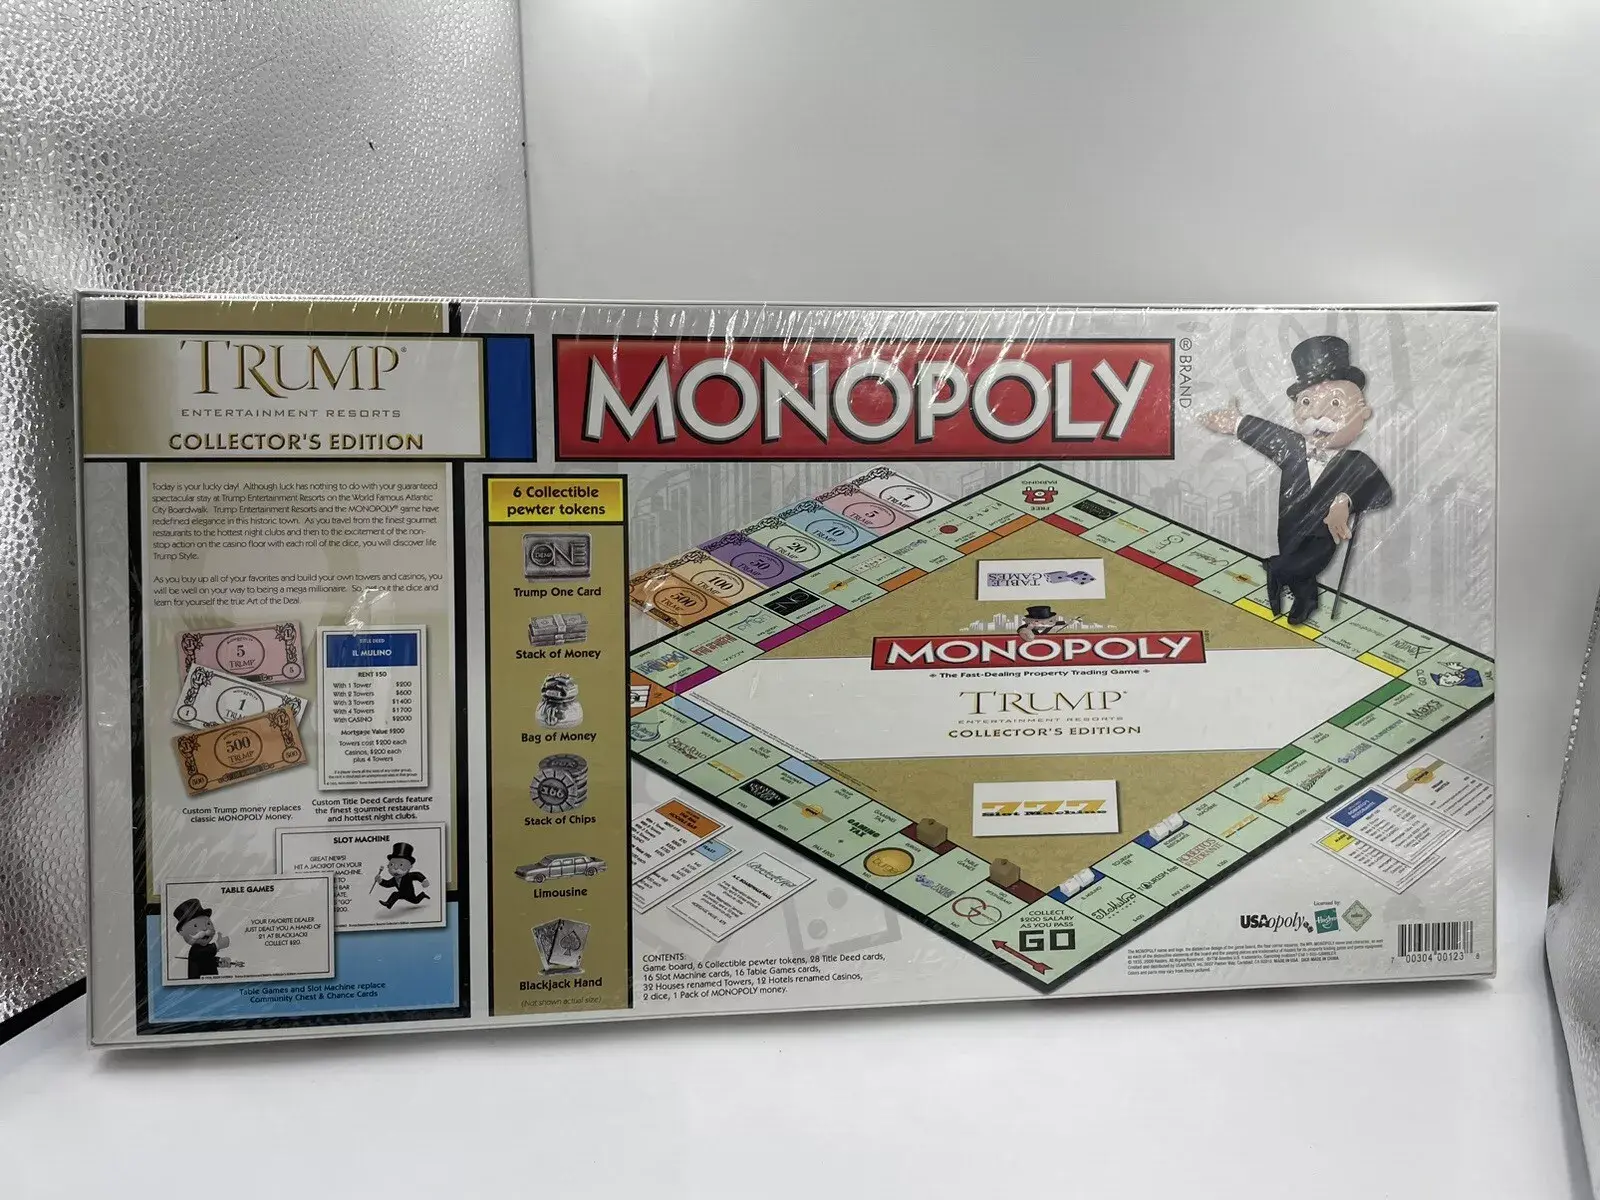 Picture of a real Trump-branded Monopoly board game, back side, highlighting the six unique player pieces. Those pieces include a "Trump ONE credit card", a stack of money, a bag of money, a stack of gambling chips, a limousine, and two cards making a Blackjack (ace of spades showing)